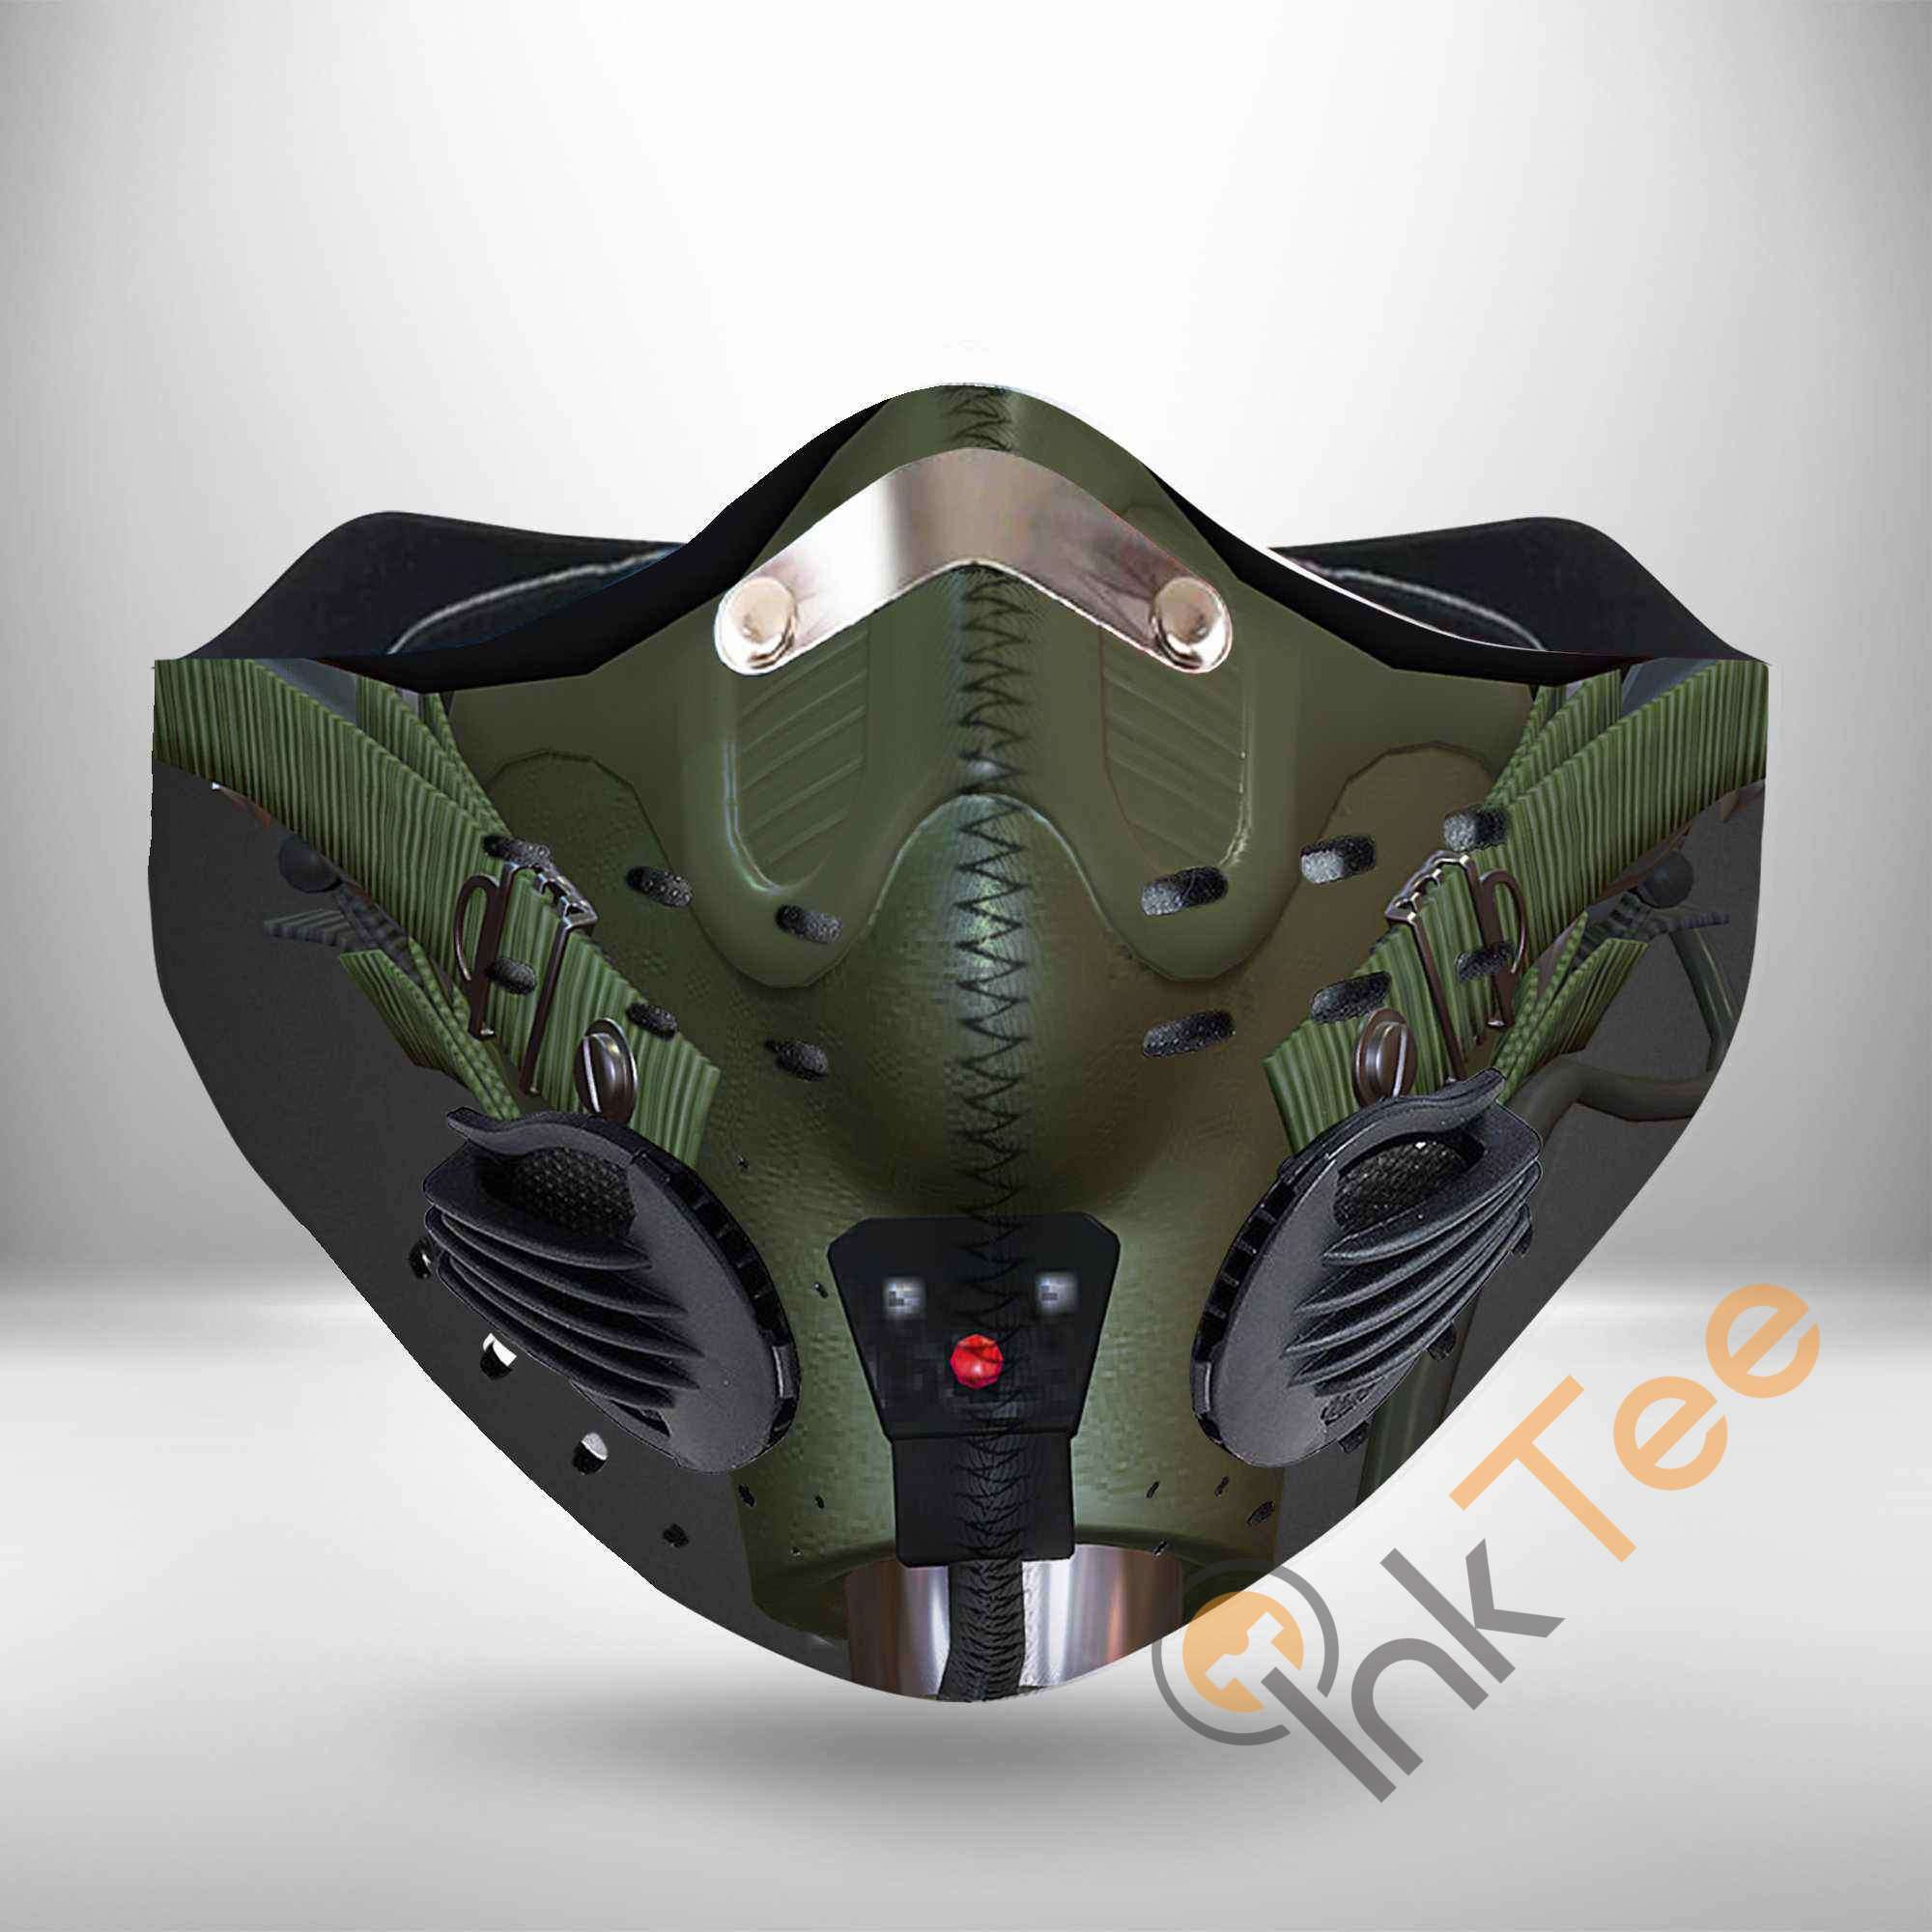 Pilot Helmet Filter Activated Carbon Pm 2.5 Face Mask - InkTee Store